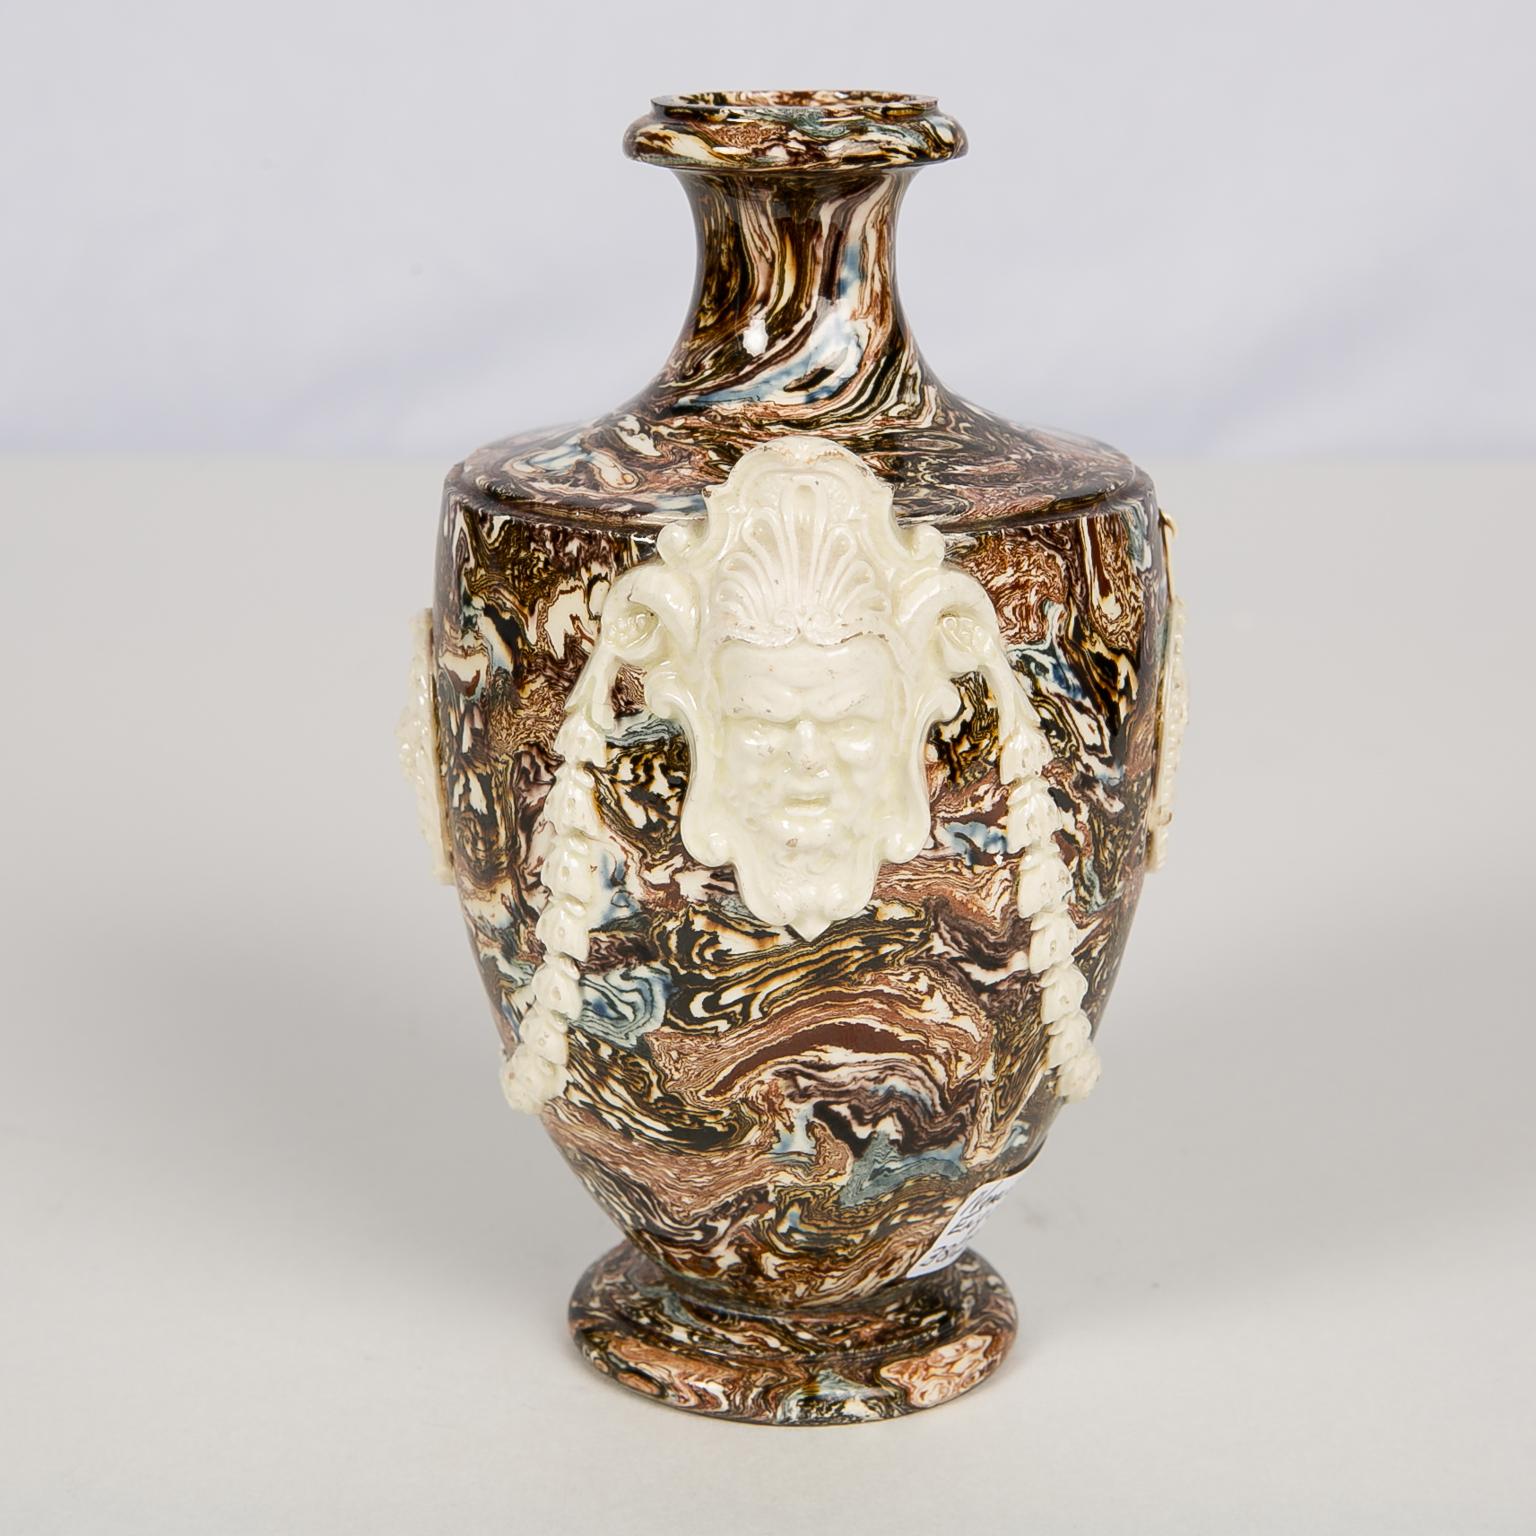 Neoclassical Solid Agateware Vase 18th Century Made by Neale & Co.